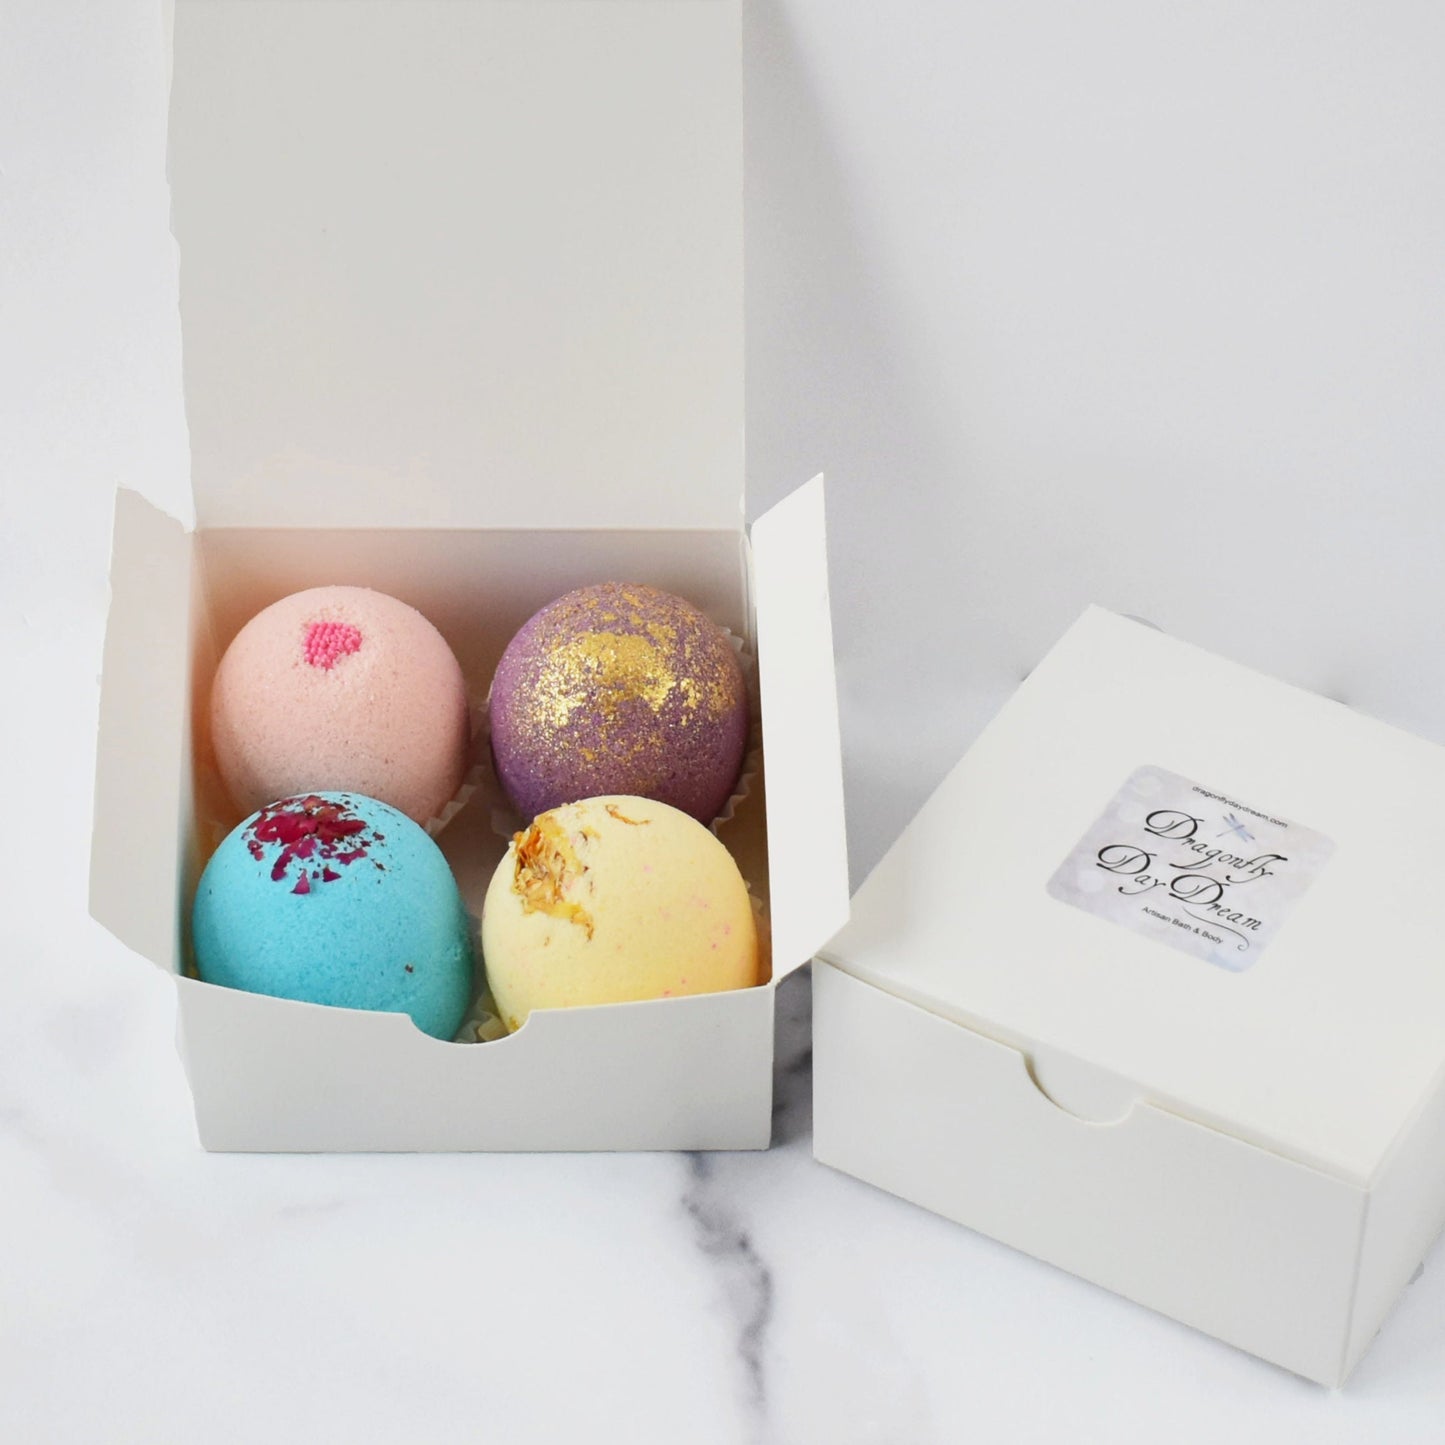 Four mini bath bombs in pink, blue, yellow, and purple colors arranged in a white gift box, with a branded white gift box beside it, all placed on top of a marble background.